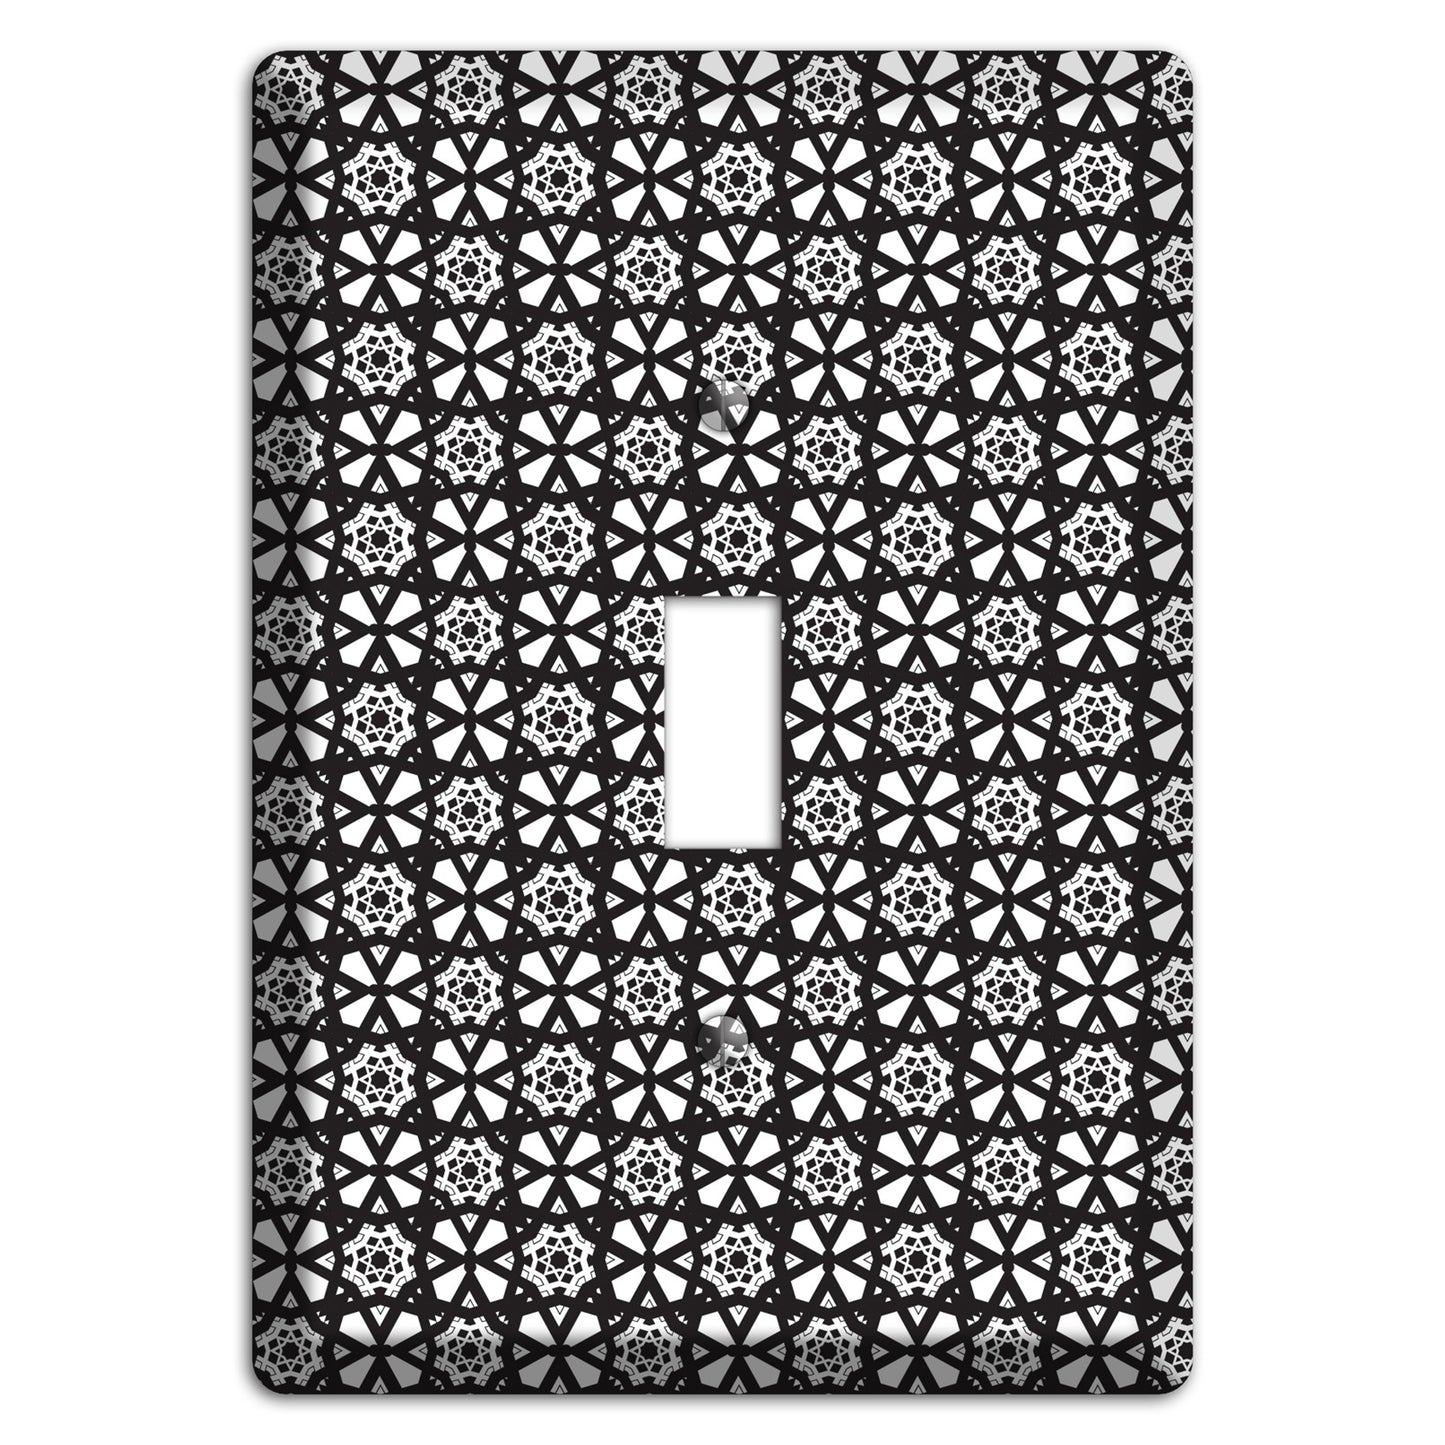 White with Black Arabesque Cover Plates